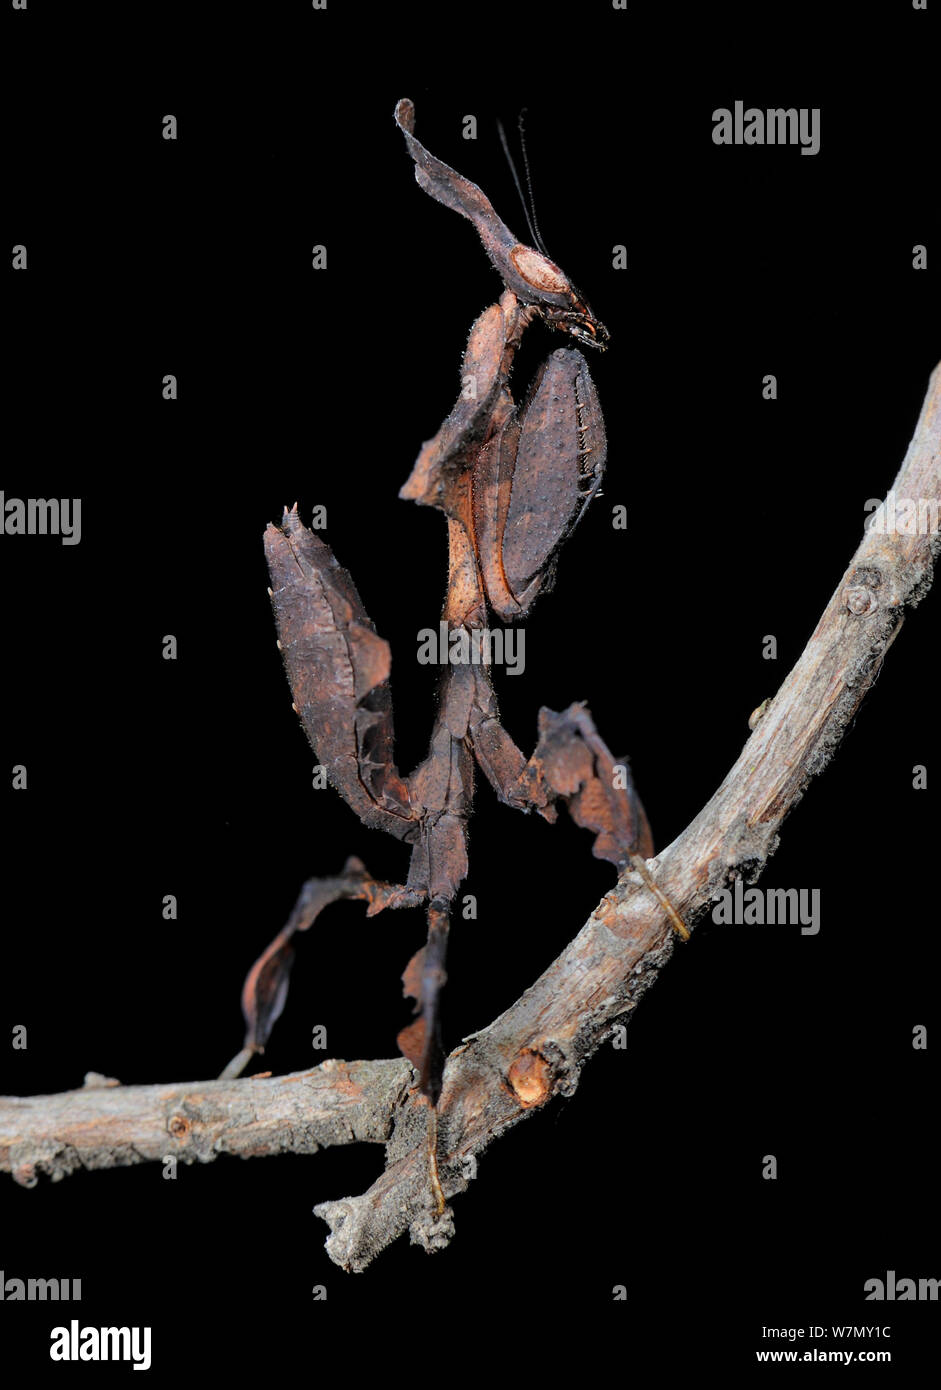 Ghost praying mantis (Phyllocrania paradoxa) on twig, captive, from Africa Stock Photo